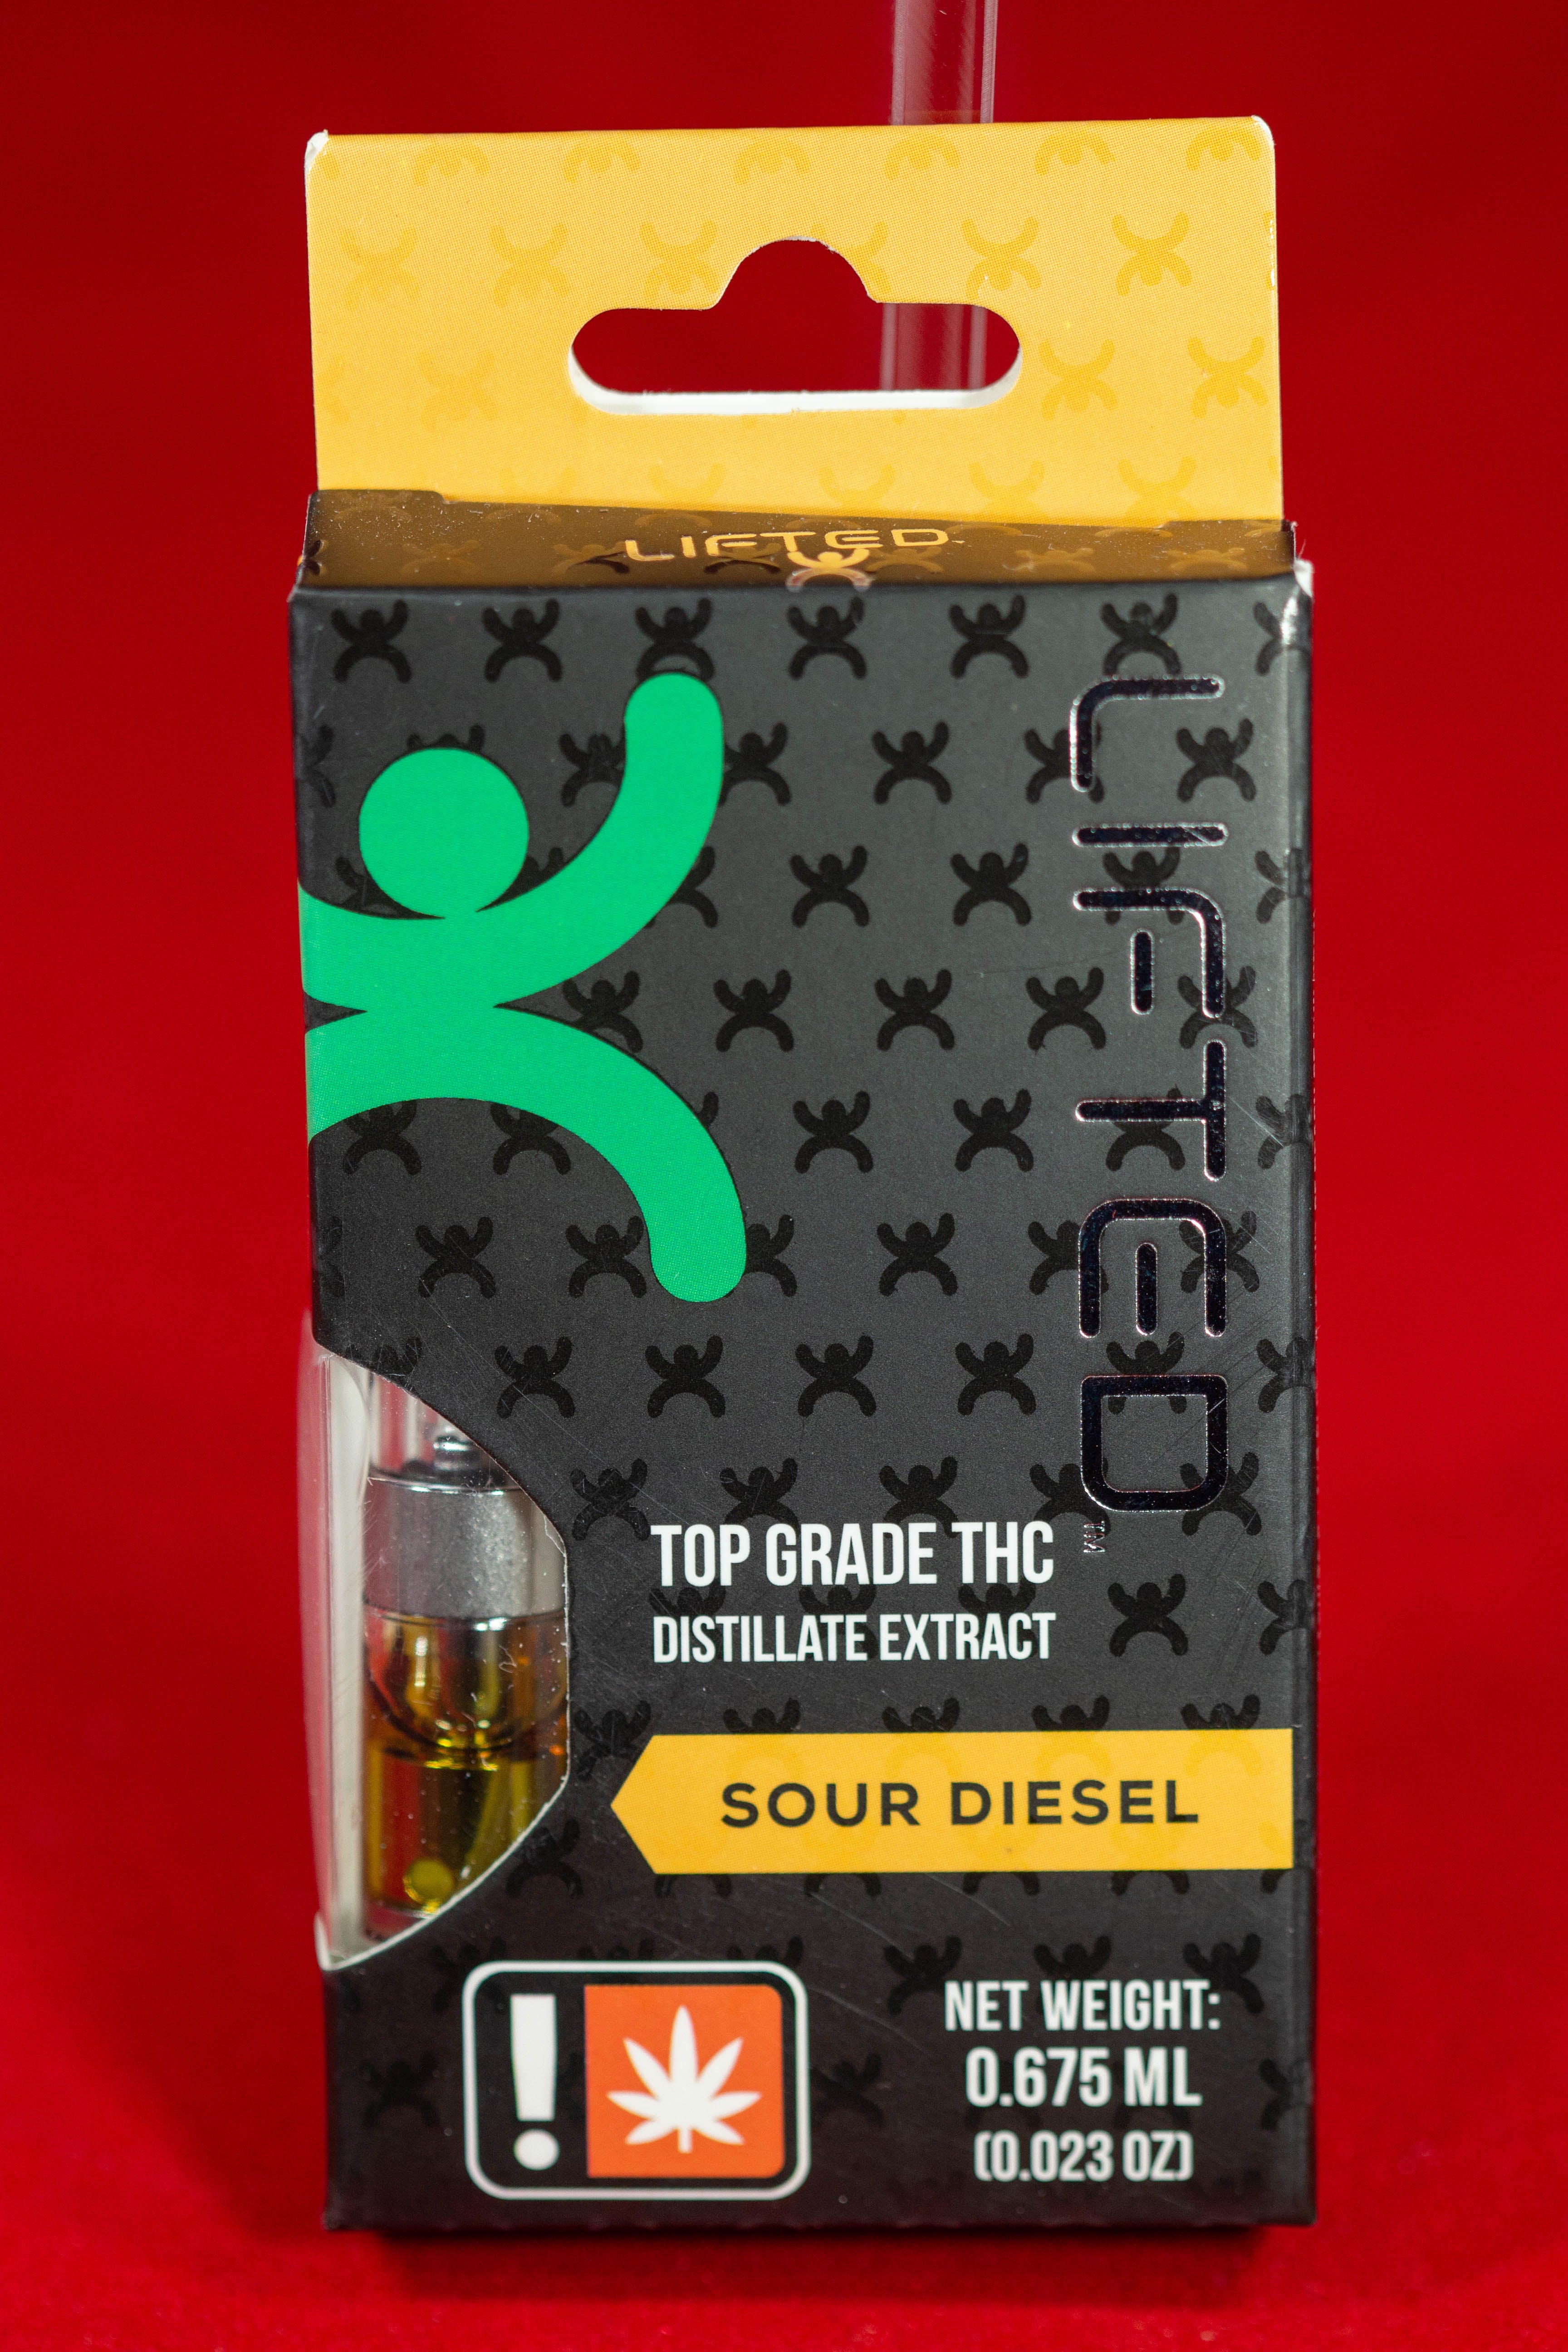 wax-sour-diesel-5g-vape-cart-by-lifted